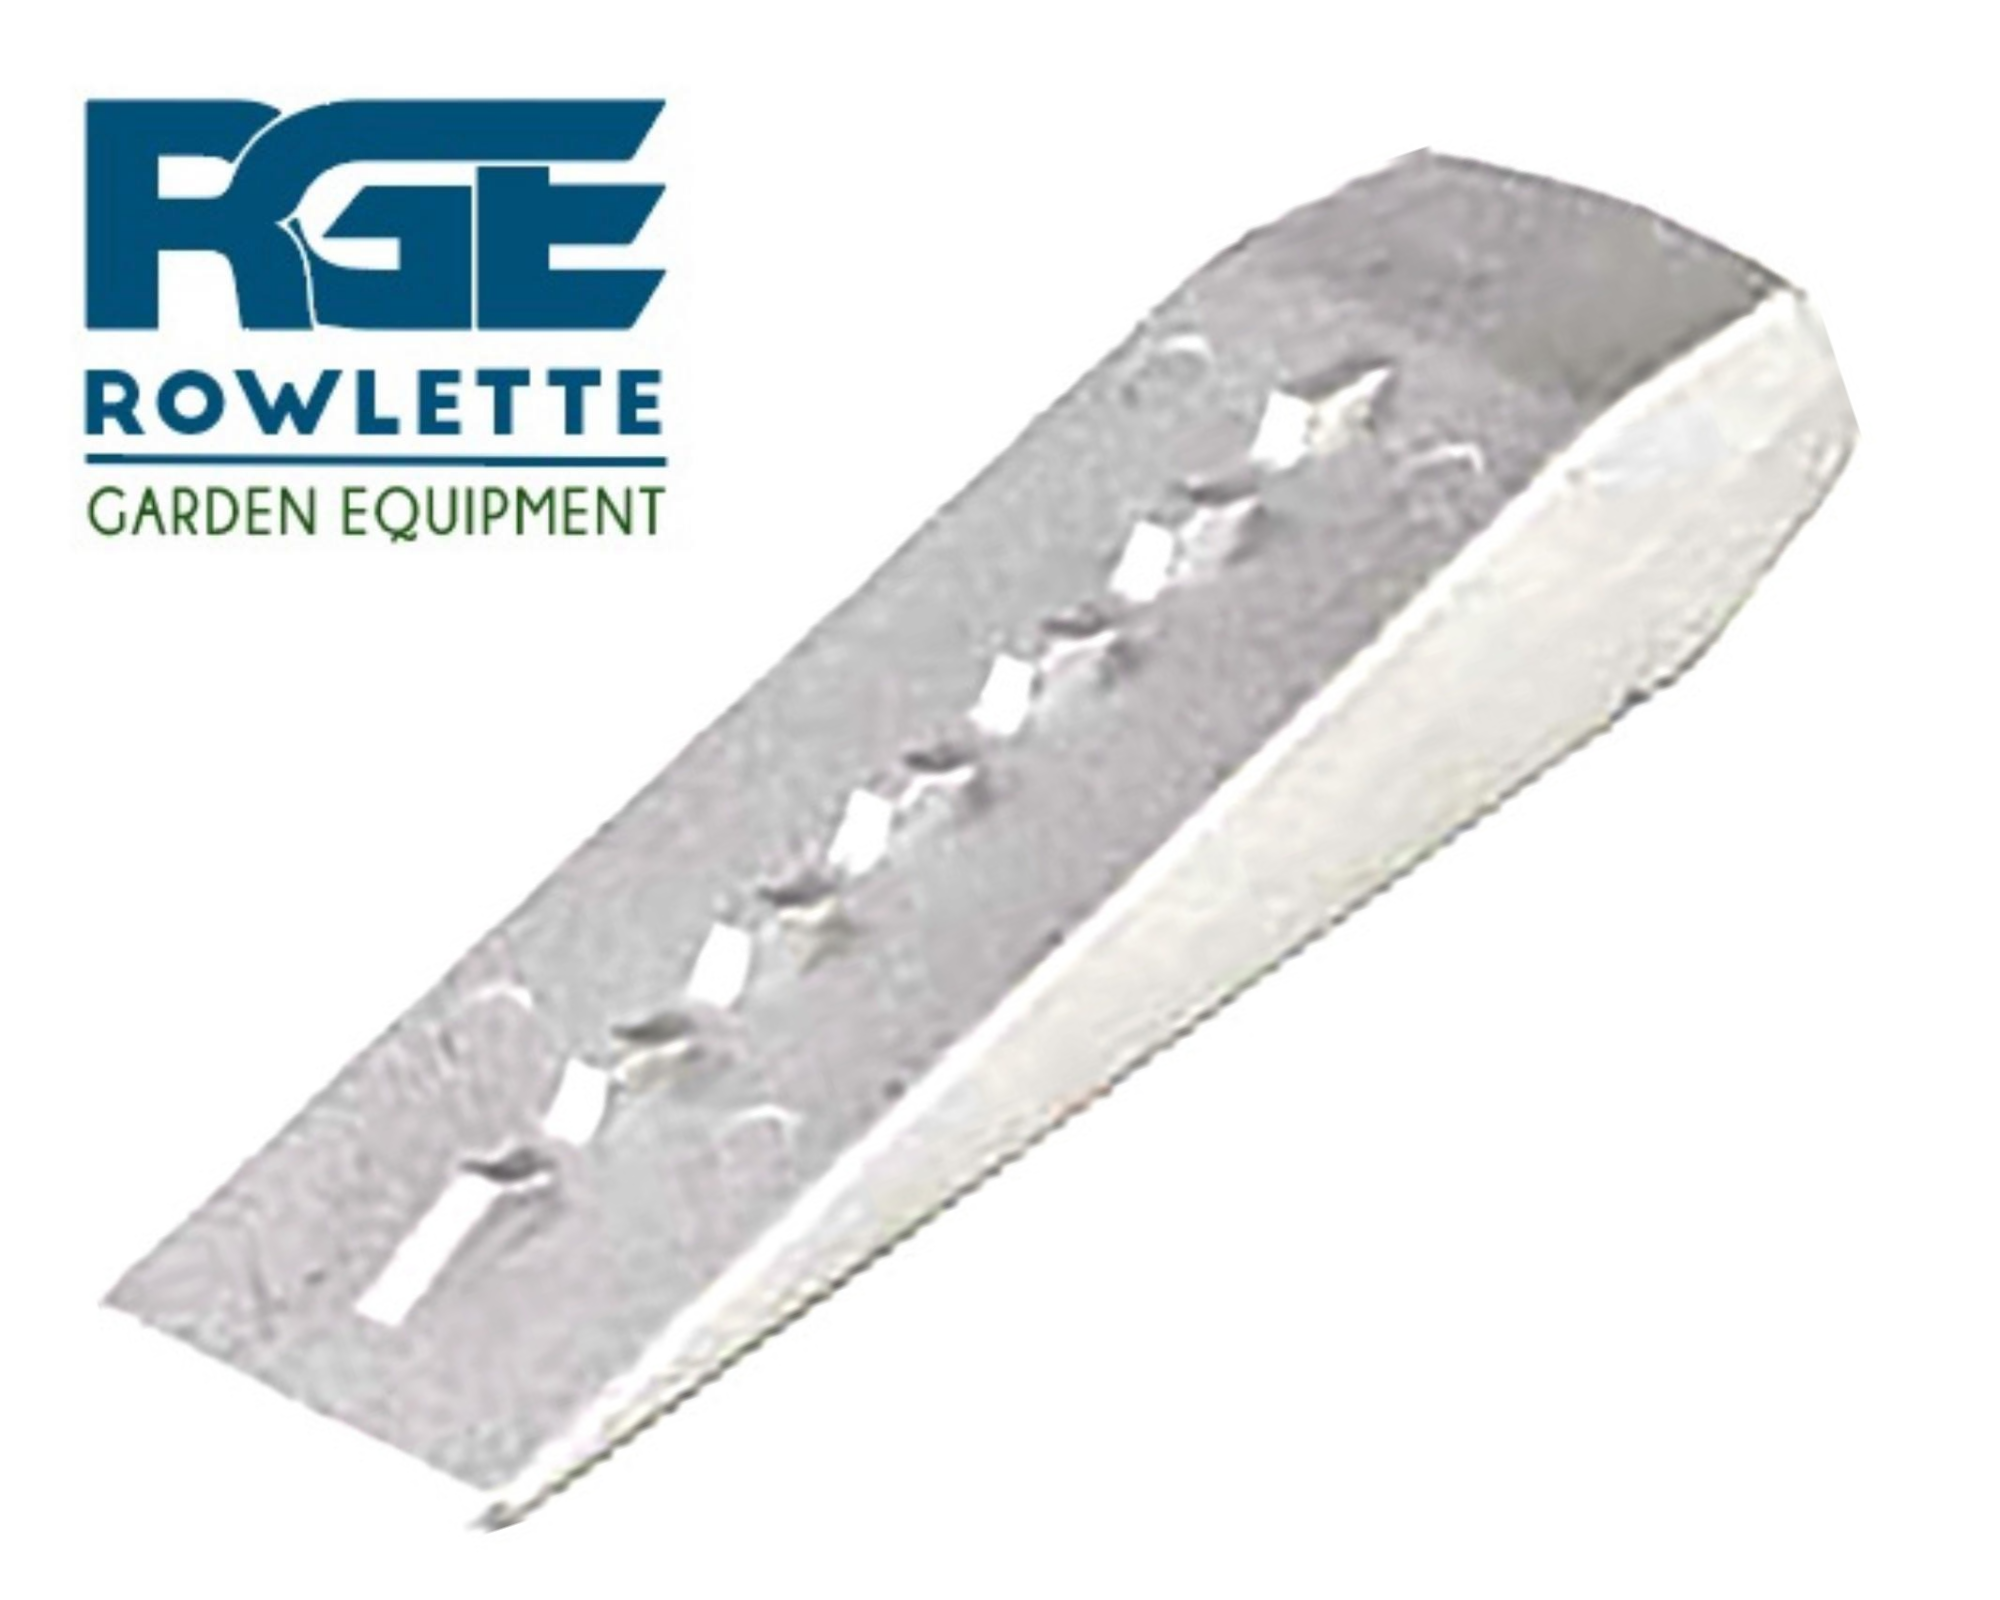 Chainsaw Cutting Wedge Made Of Aluminium Size 120 mm x 40 mm x 20 mm